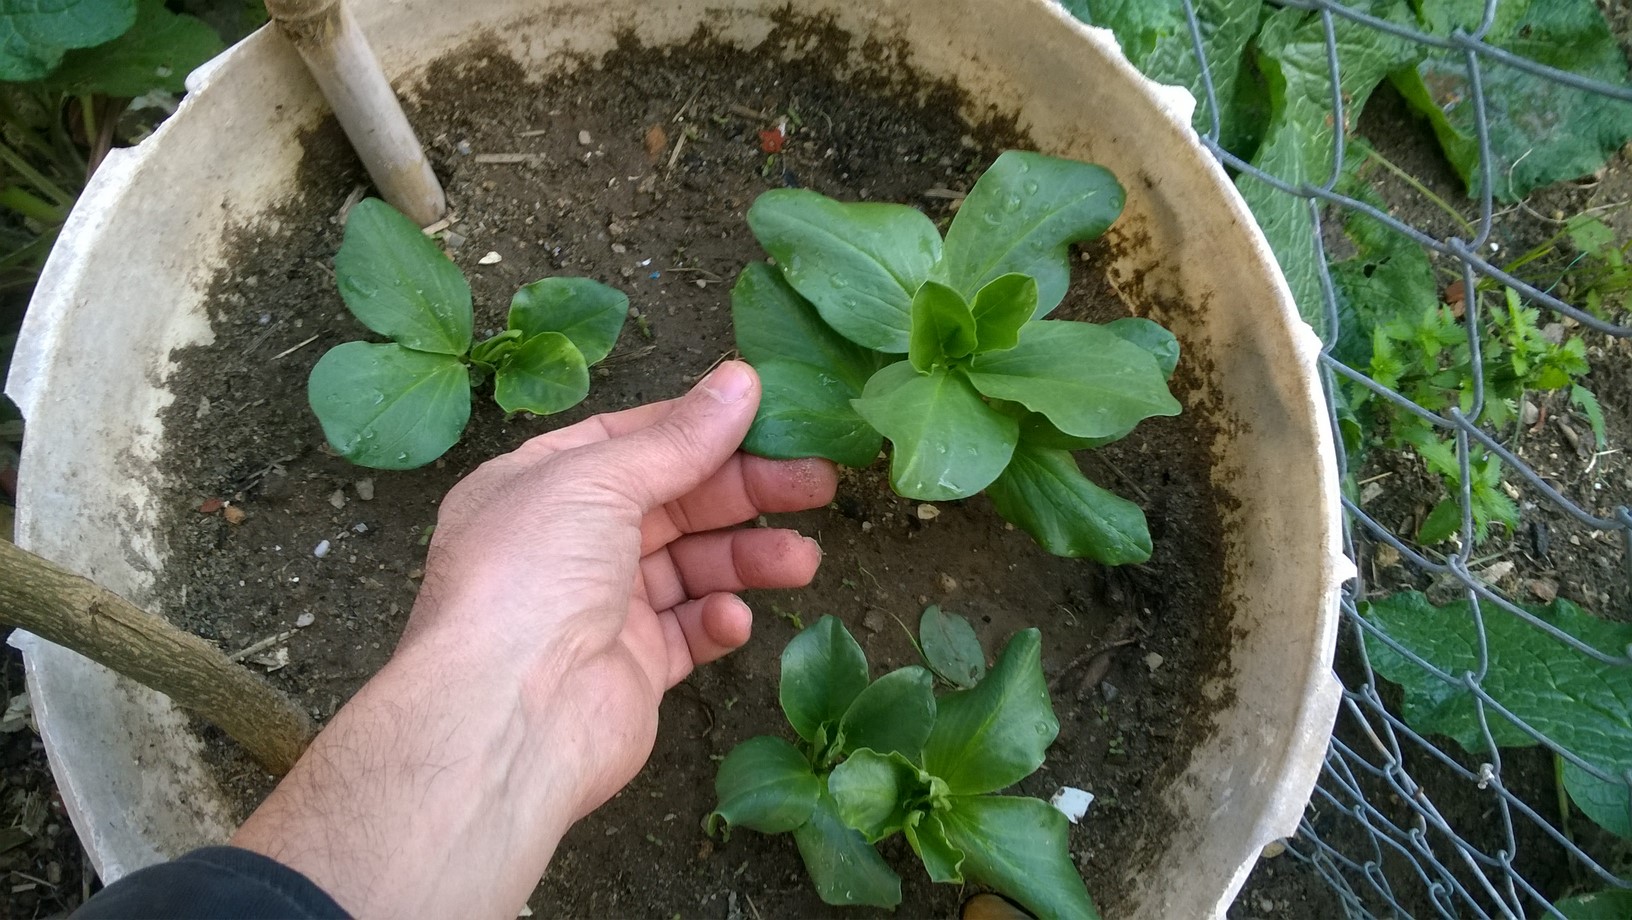 From 3 to 5 days you should see the broad bean seedlings emerging out from the soil.